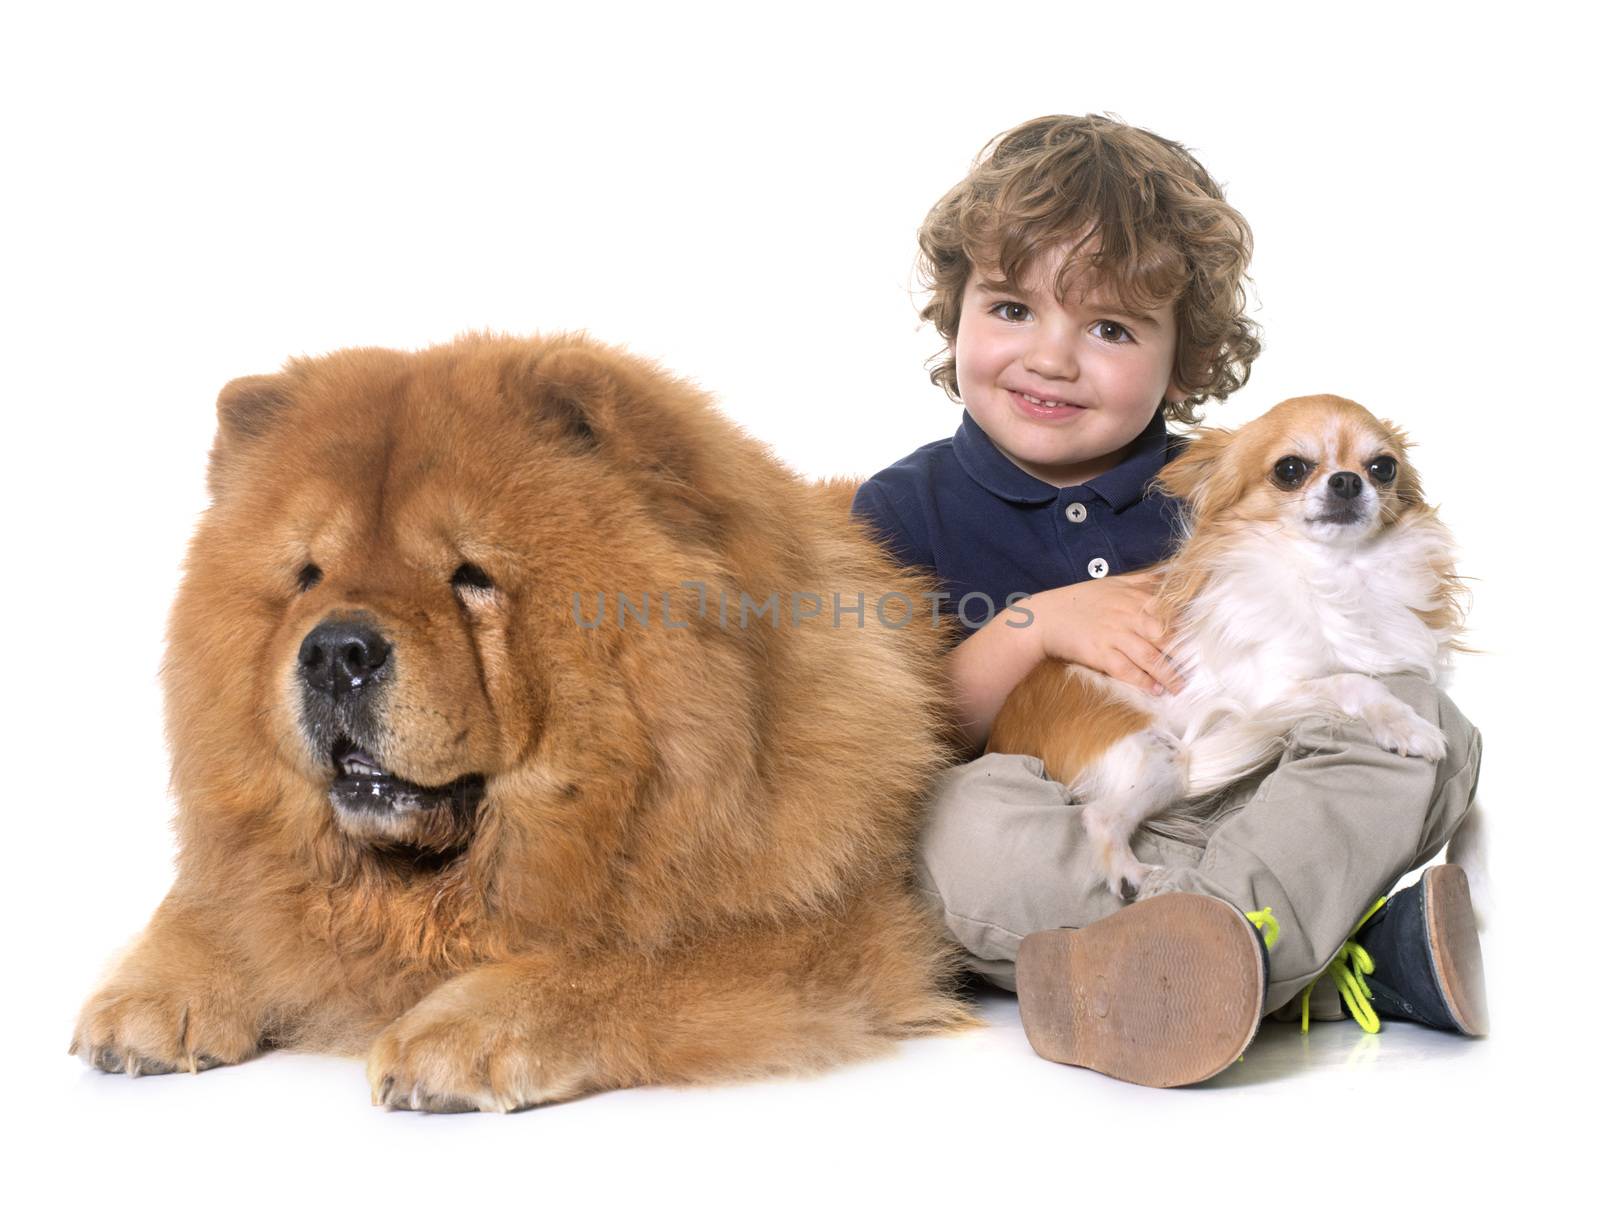 chow chow, chihuahua and little boy by cynoclub